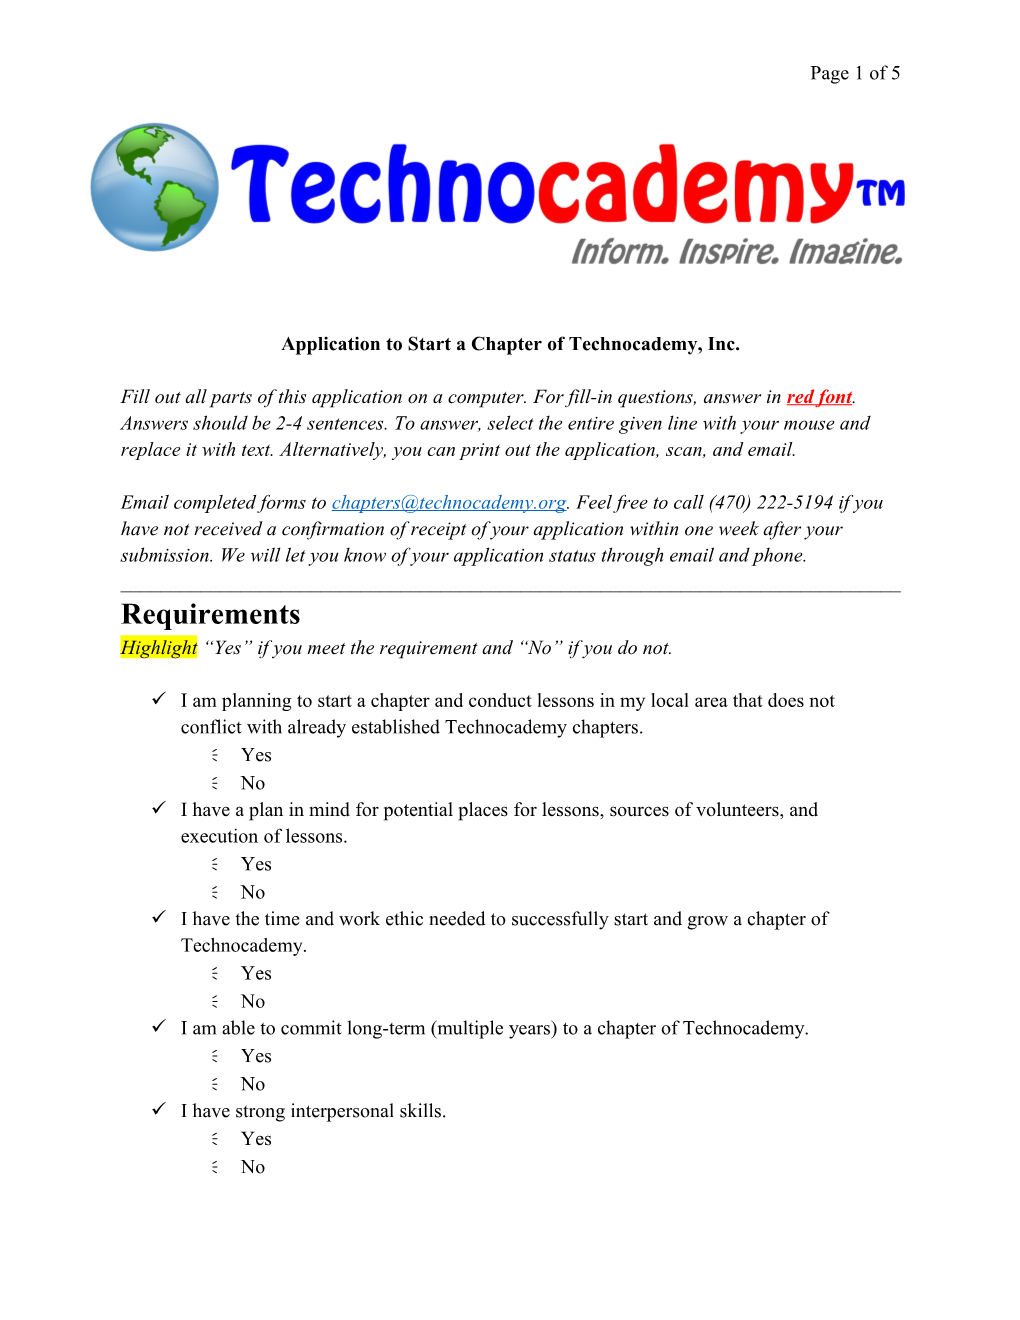 Application to Start a Chapter of Technocademy, Inc